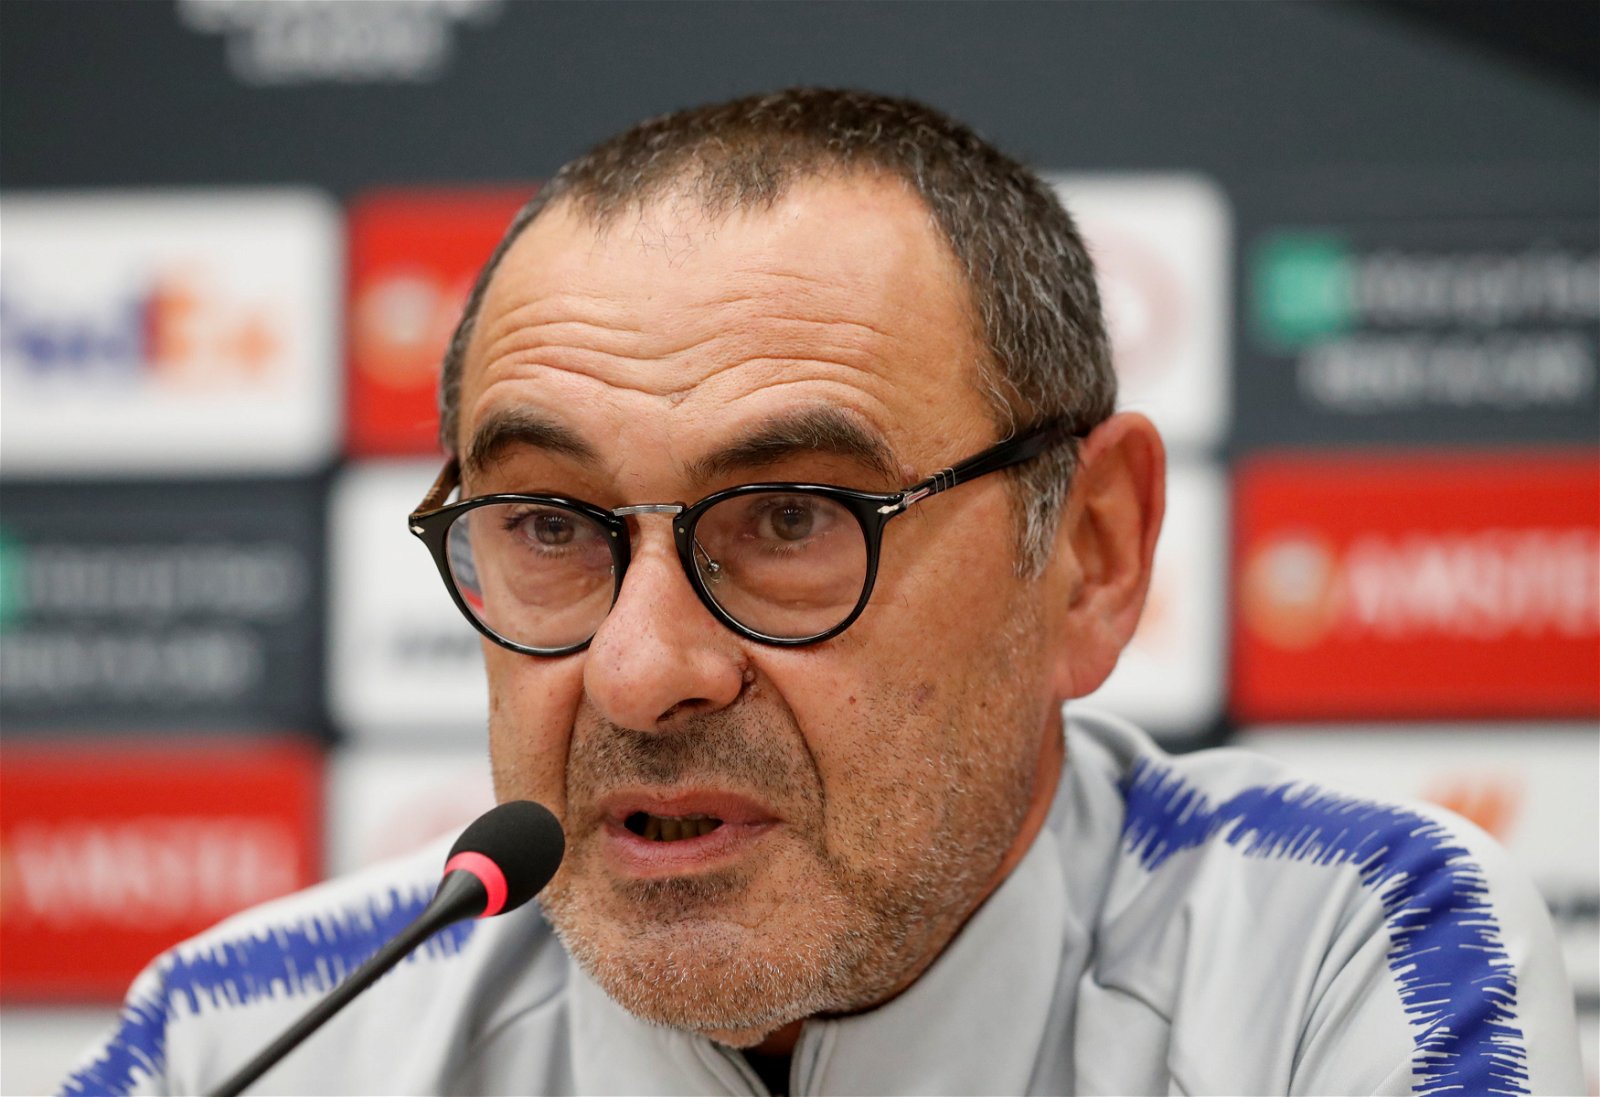 Sarri says that he has banned one thing from Chelsea's training